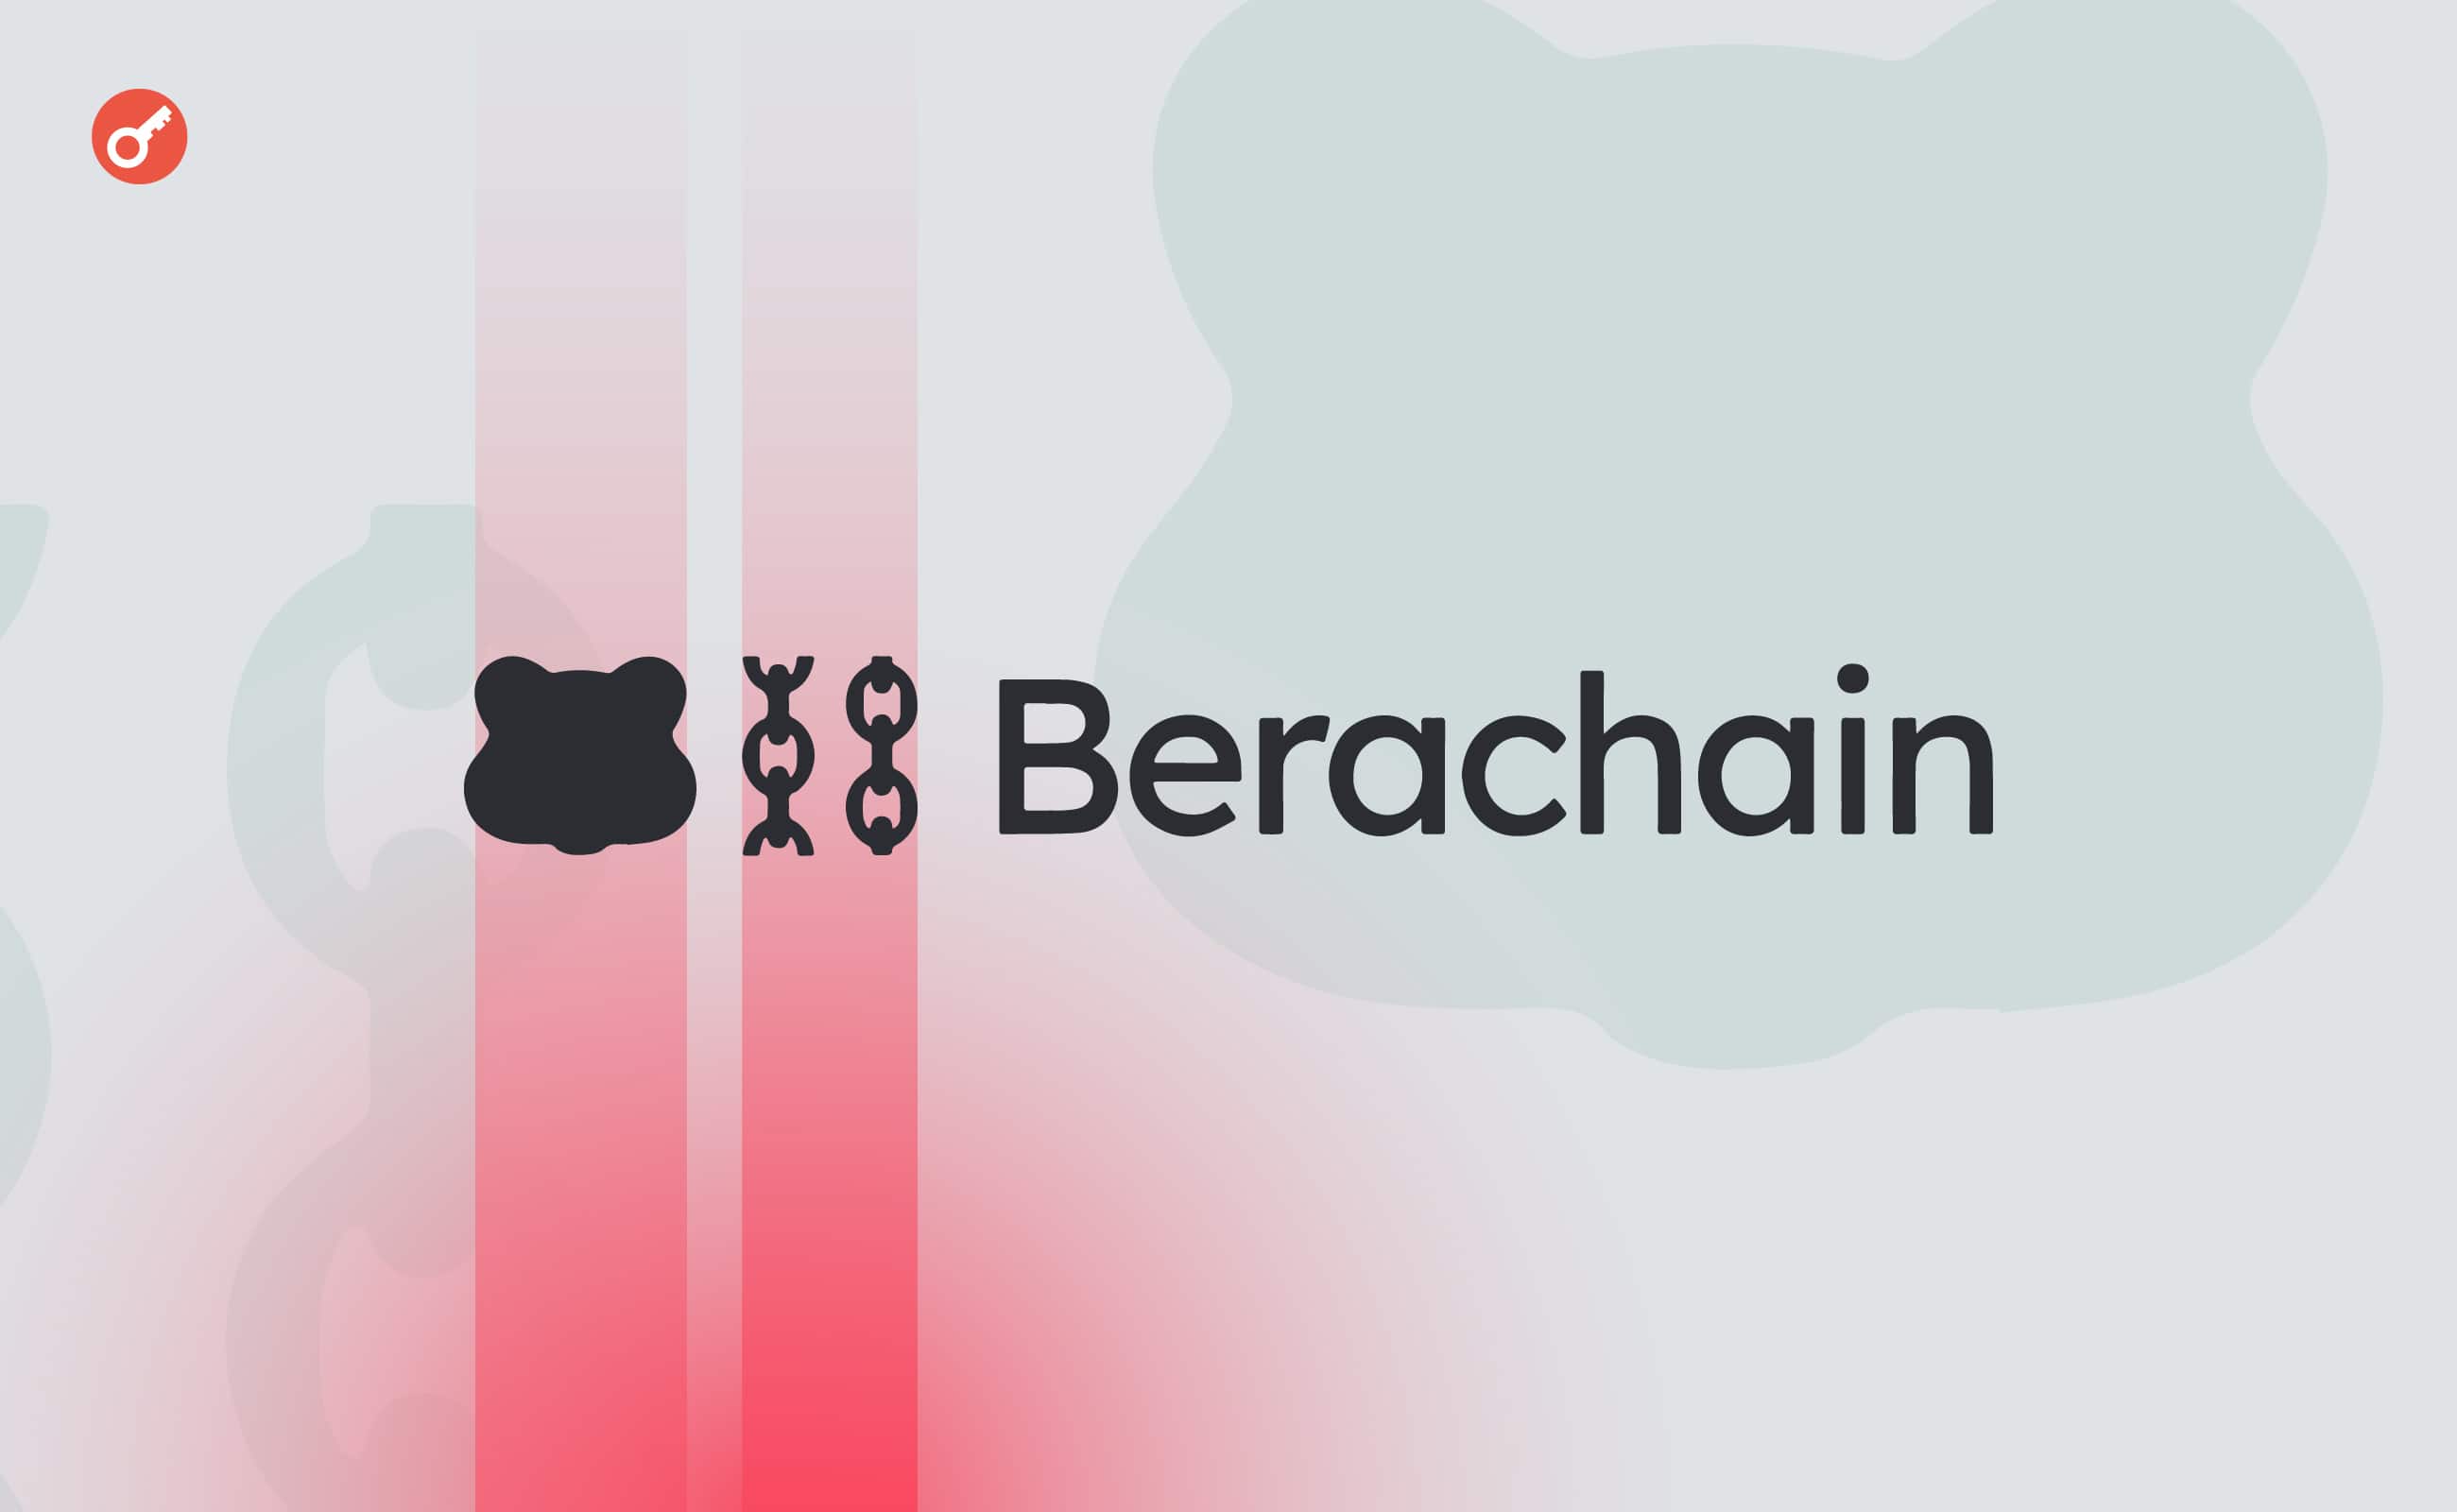 Berachain has attracted $69 million in investments at a valuation of $1.5 billion